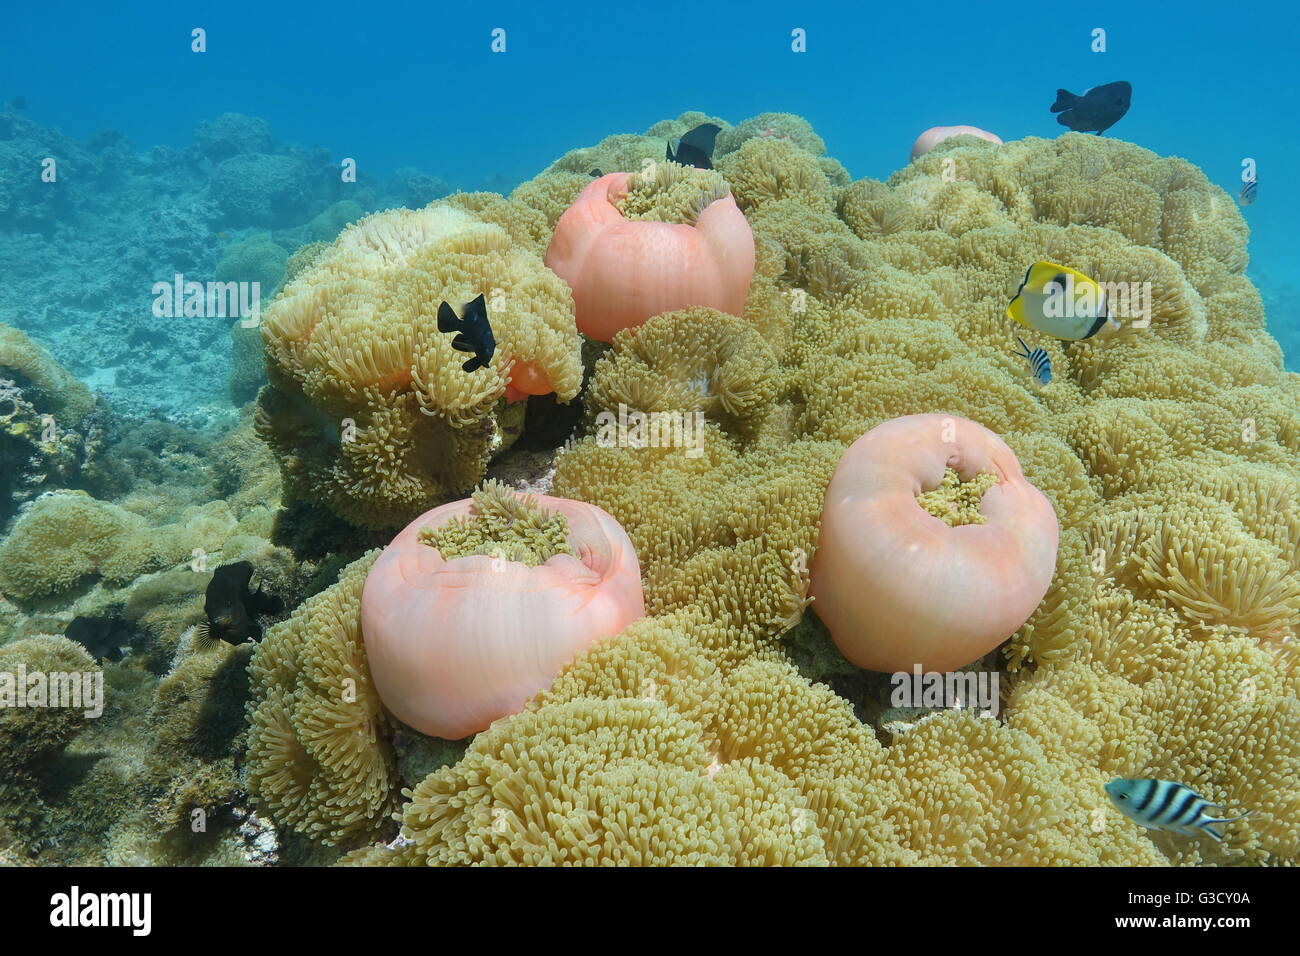 Cluster of sea anemones, Heteractis magnifica, underwater with tropical fish, Huahine, Pacific ocean, French Polynesia Stock Photo